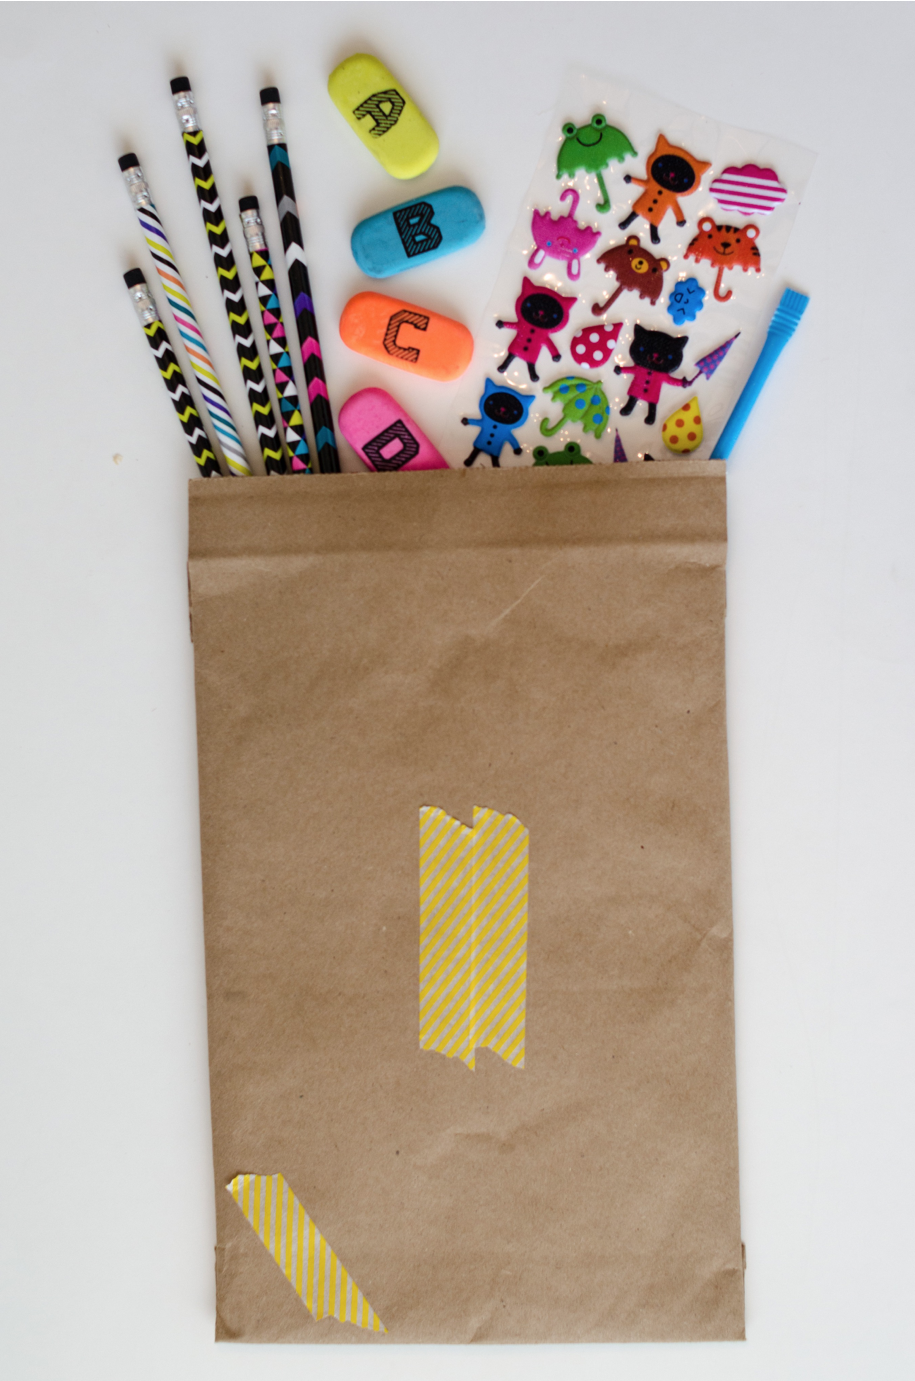 such a fun treat to send! Back to school snail mail for kids